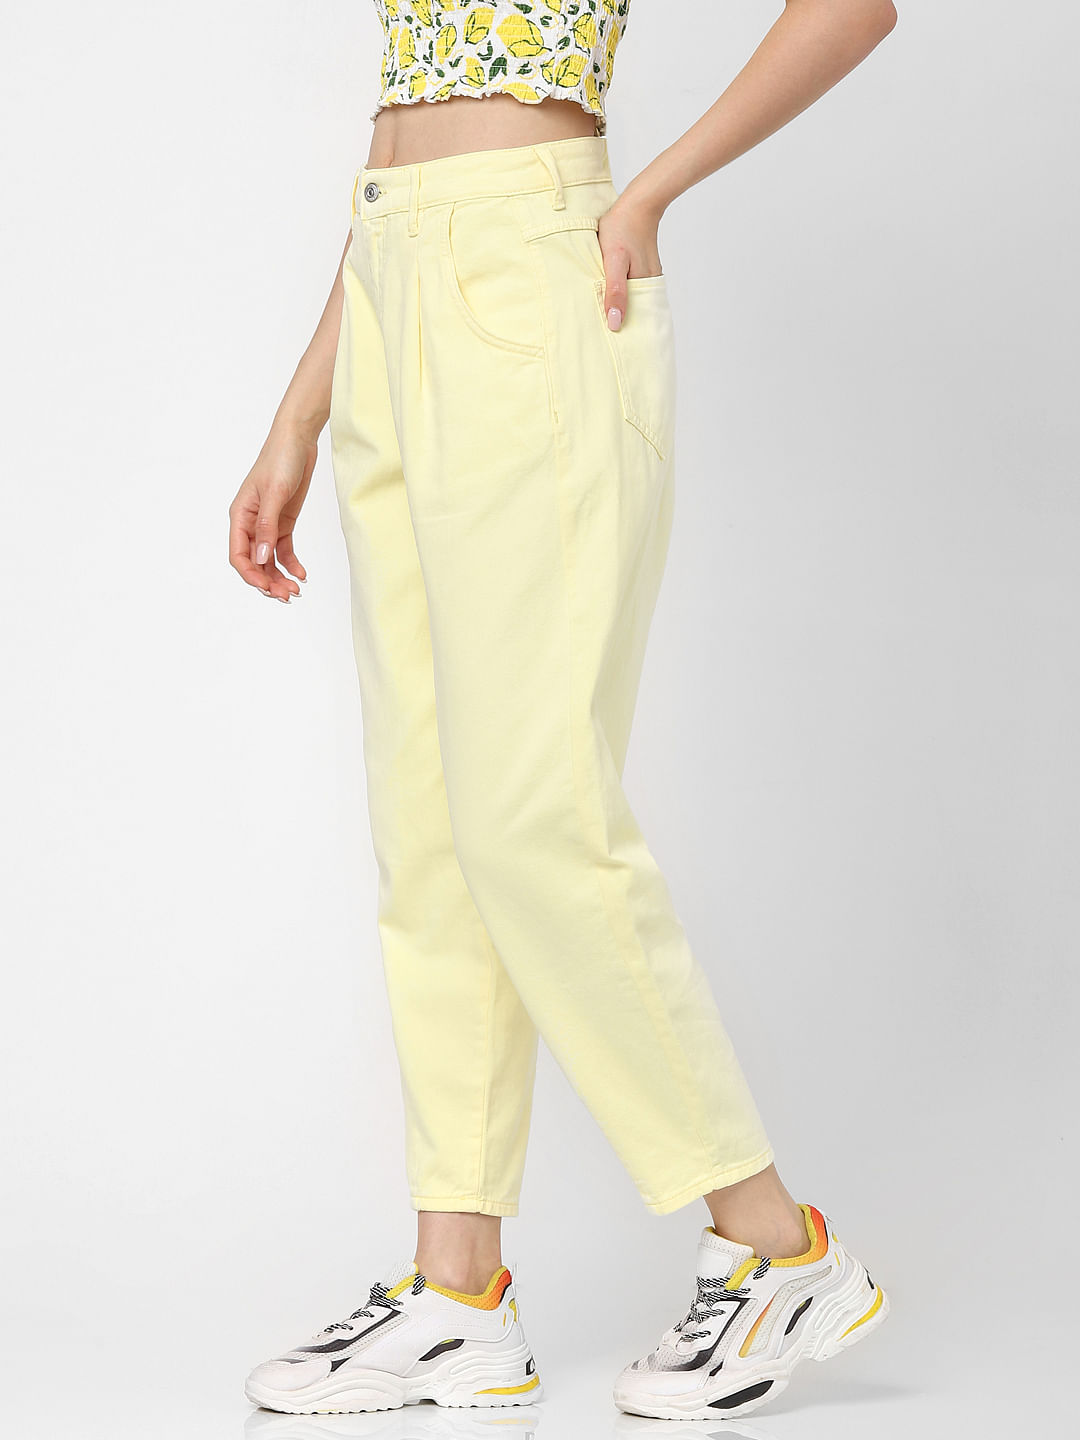 The Paperbag Pant Canvas – Everlane